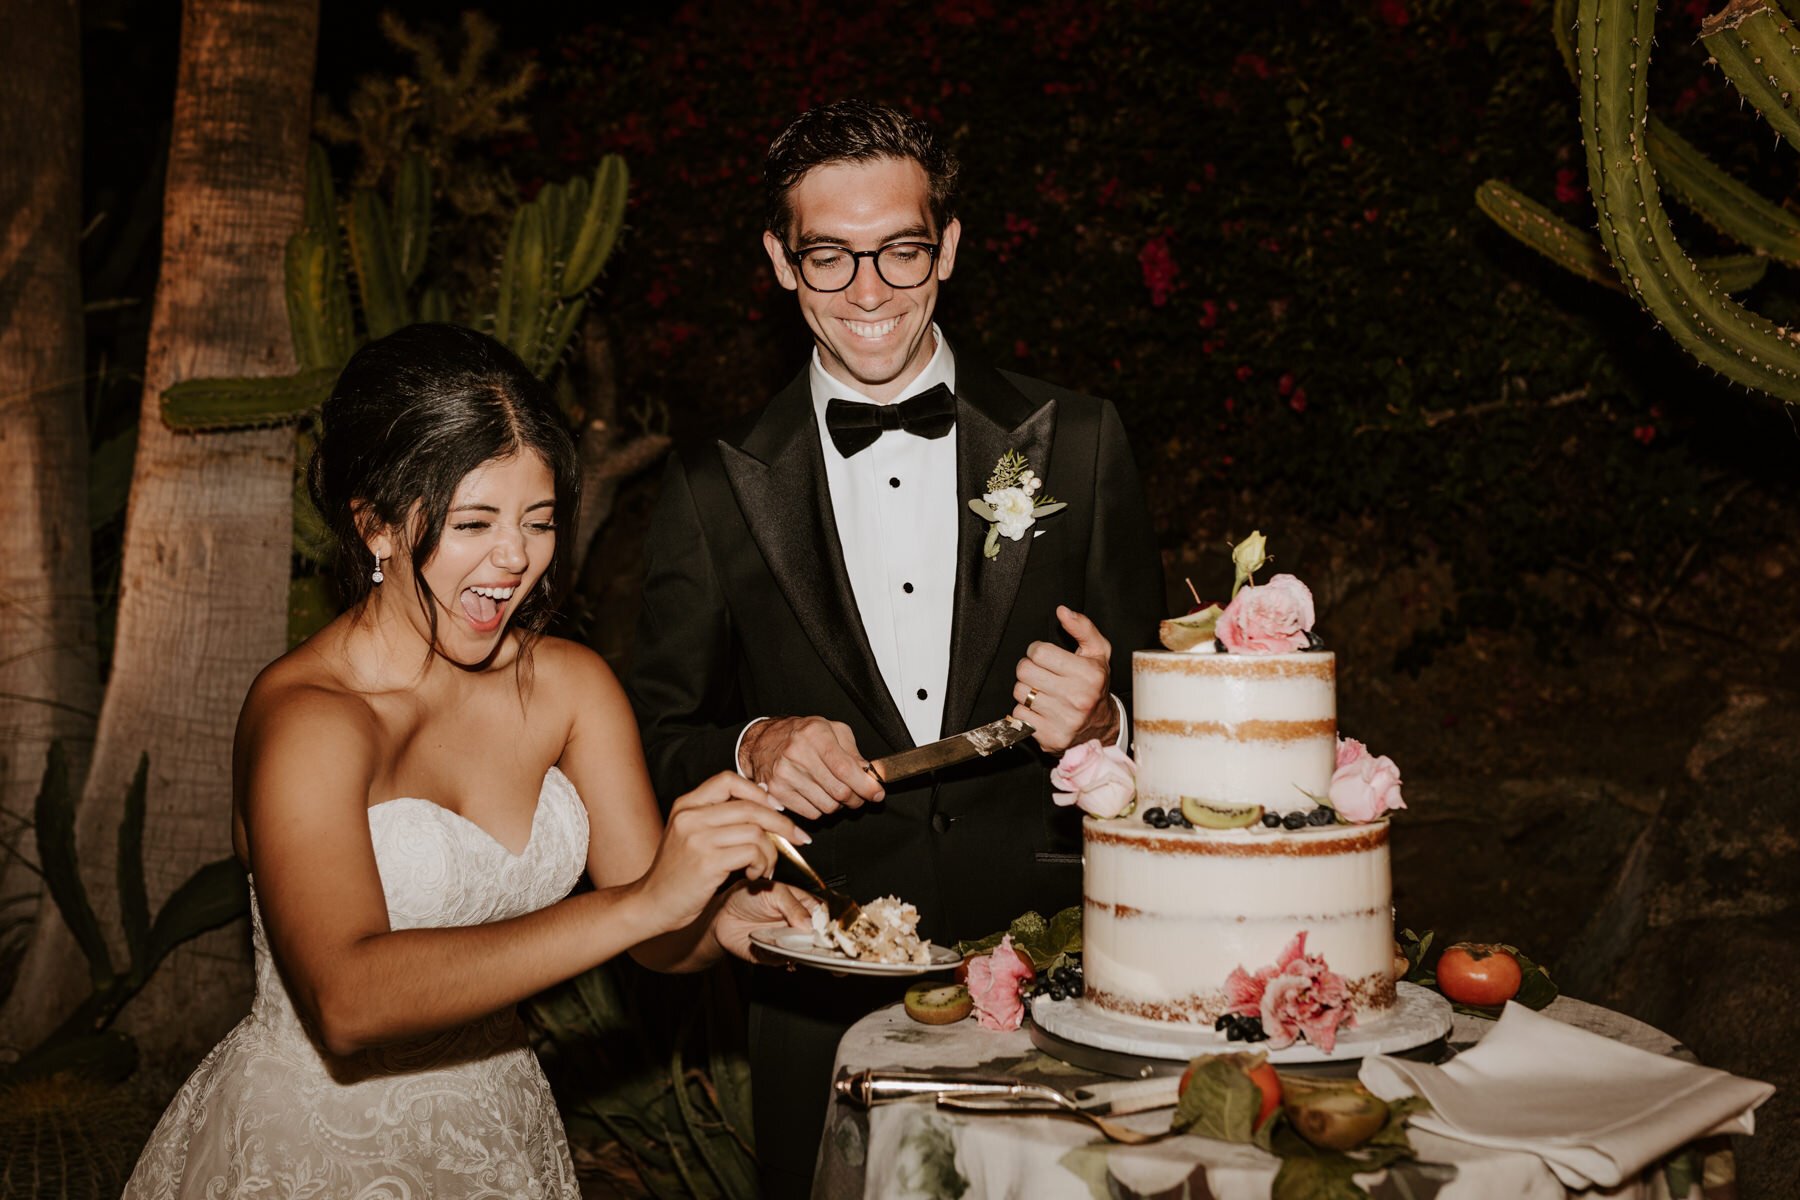 Bride and Groom cake cutting, Spencer’s Restaurant Palm Springs Wedding, Palm Springs Wedding Photographer, Tida Svy Photography